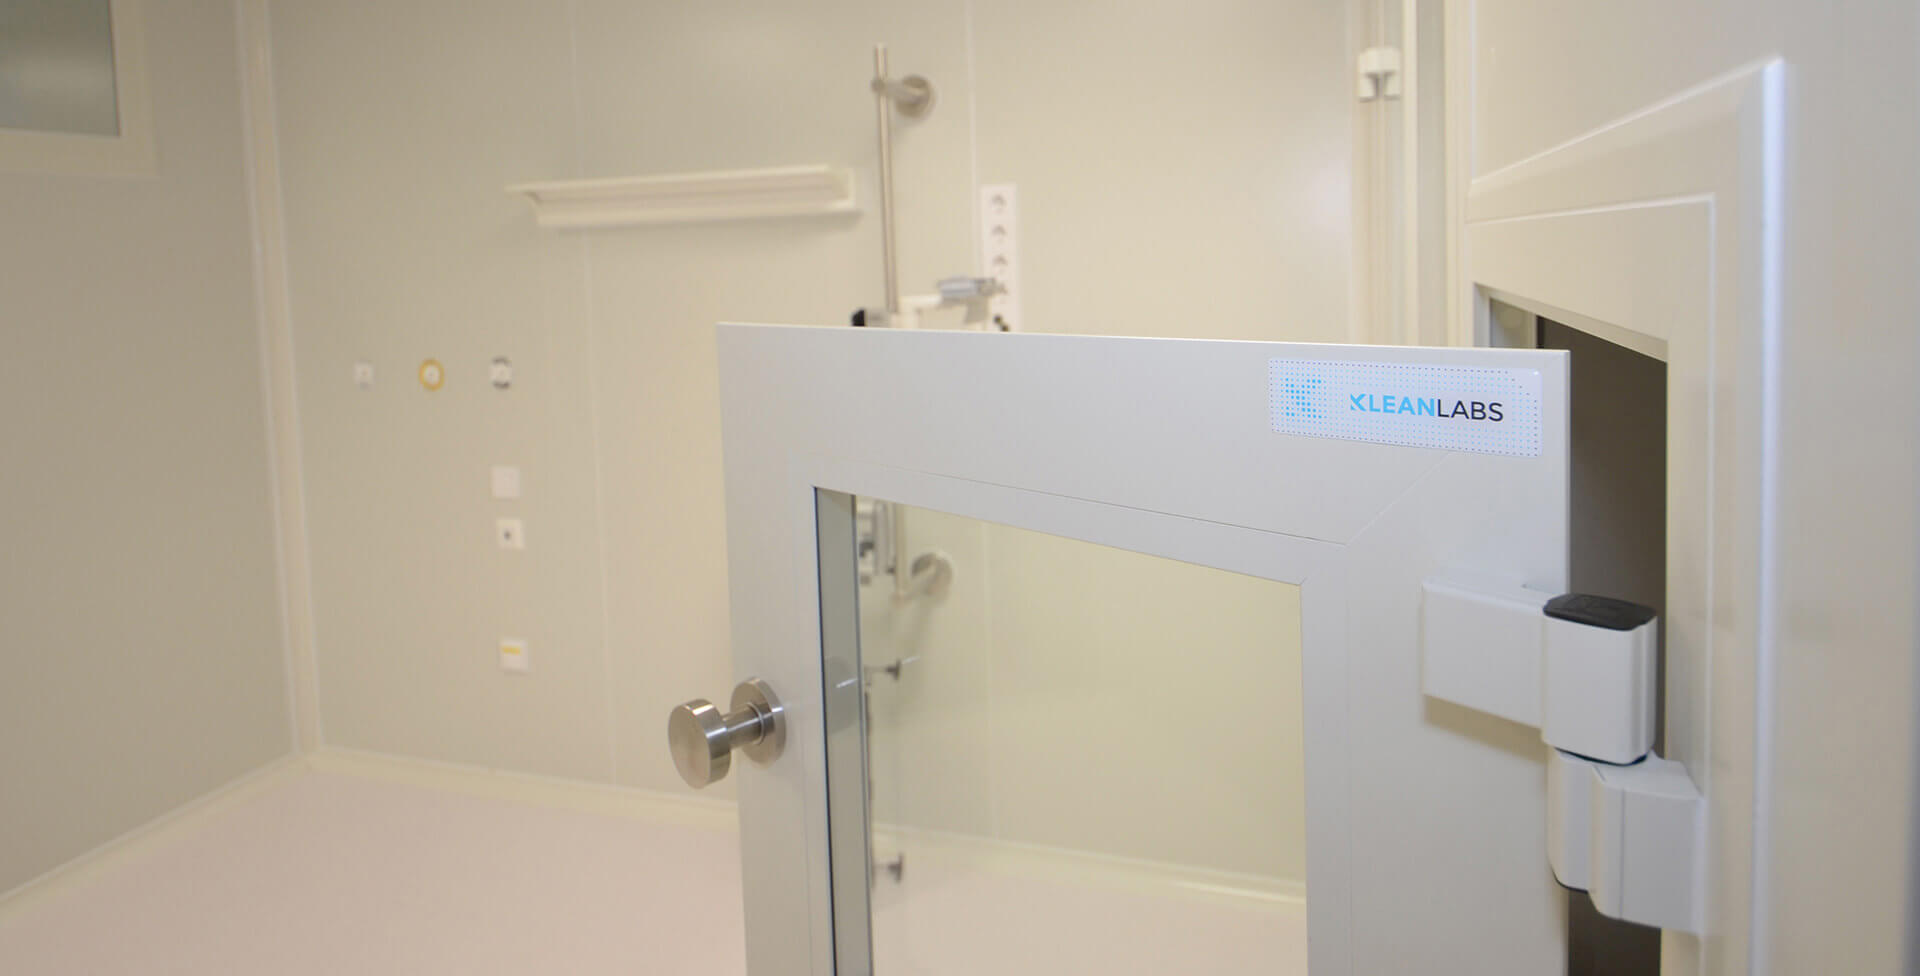 Introducing the KleanLabs refrigerated pass through box for clean rooms